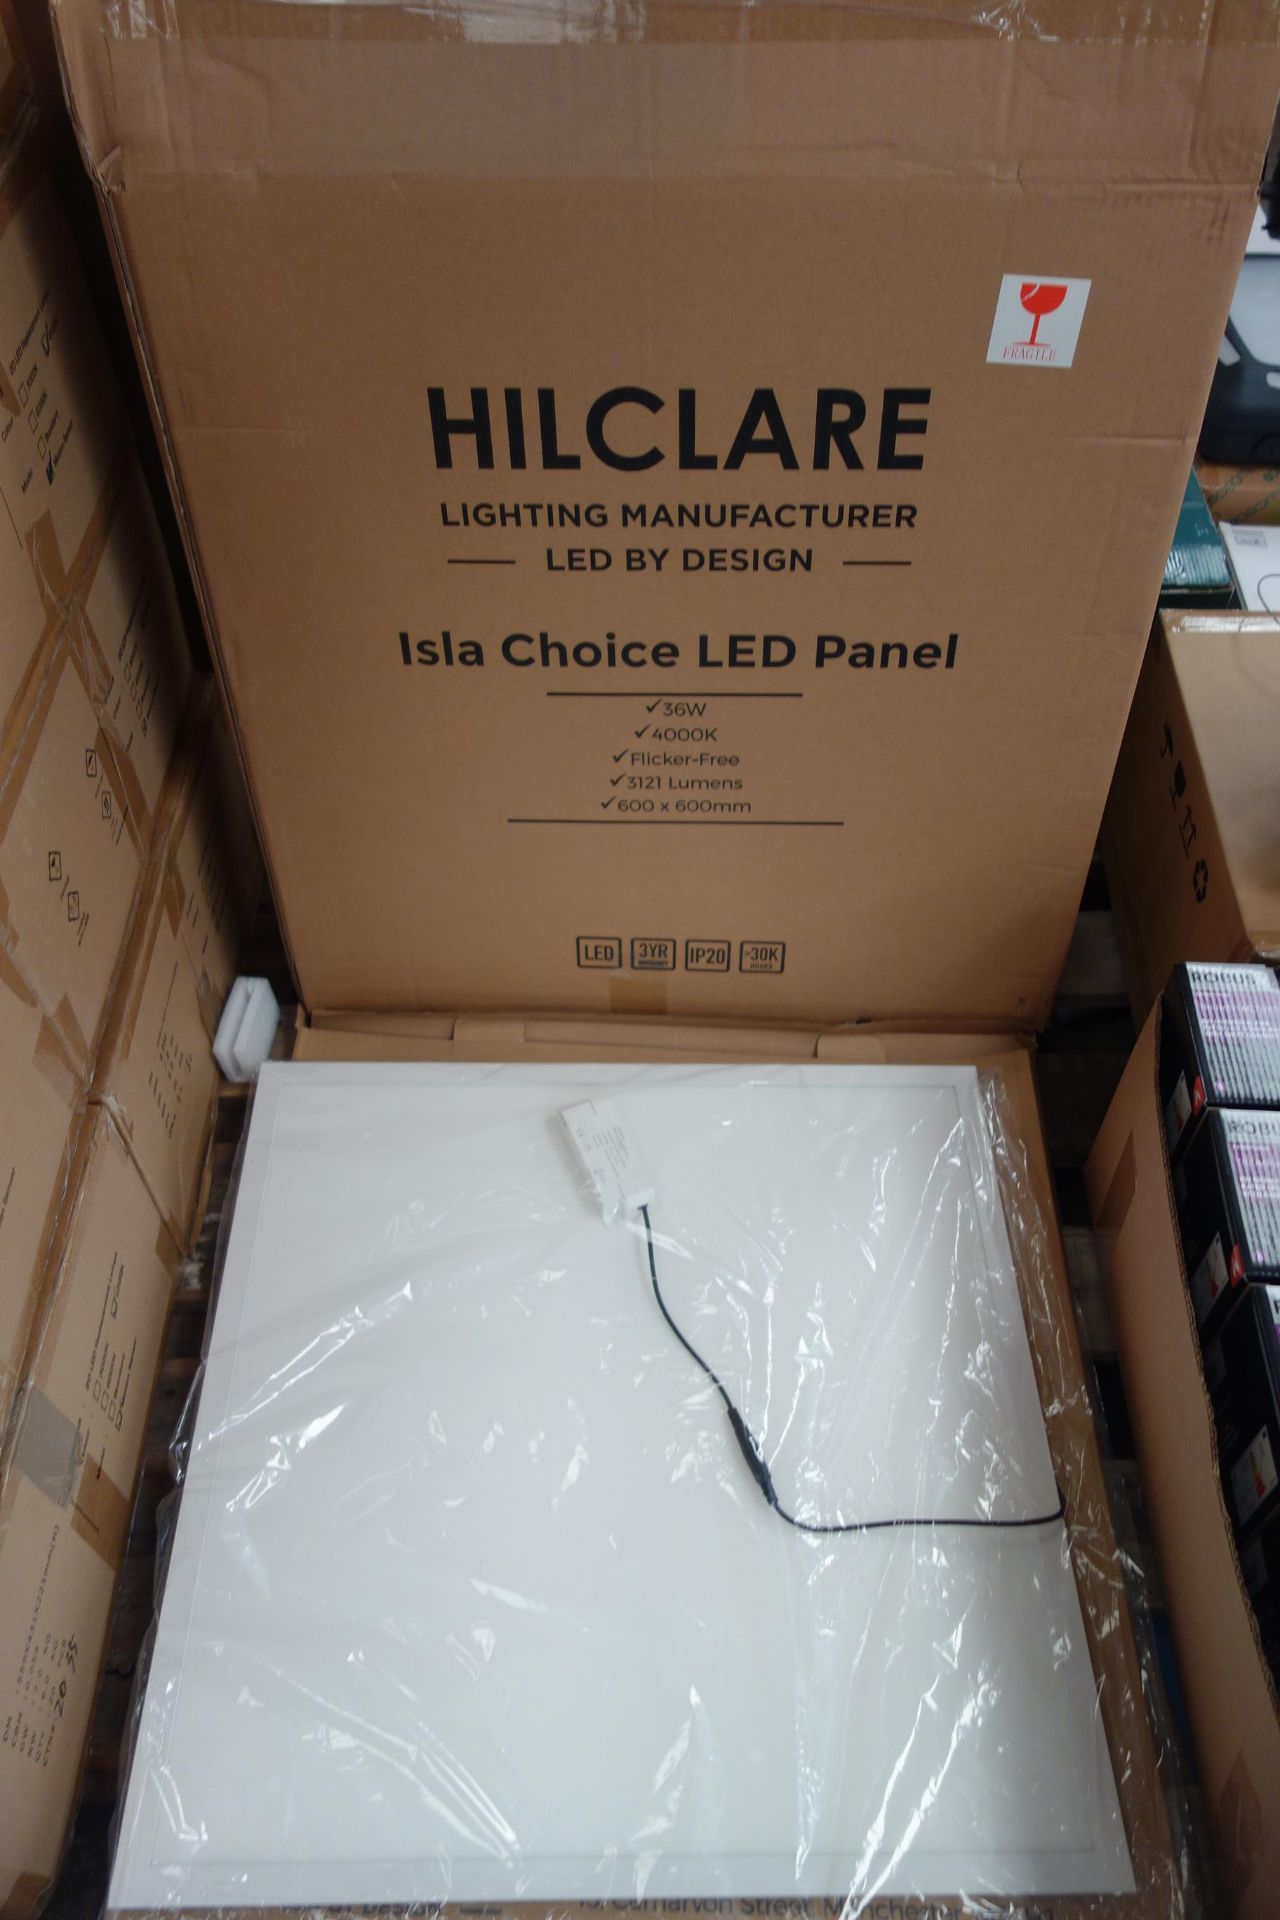 10 X HILCLARE PIC3640 36W LED Panel Fitting 596x596 4000K Flicker-Free 3121 Lumens c/w LED Driver